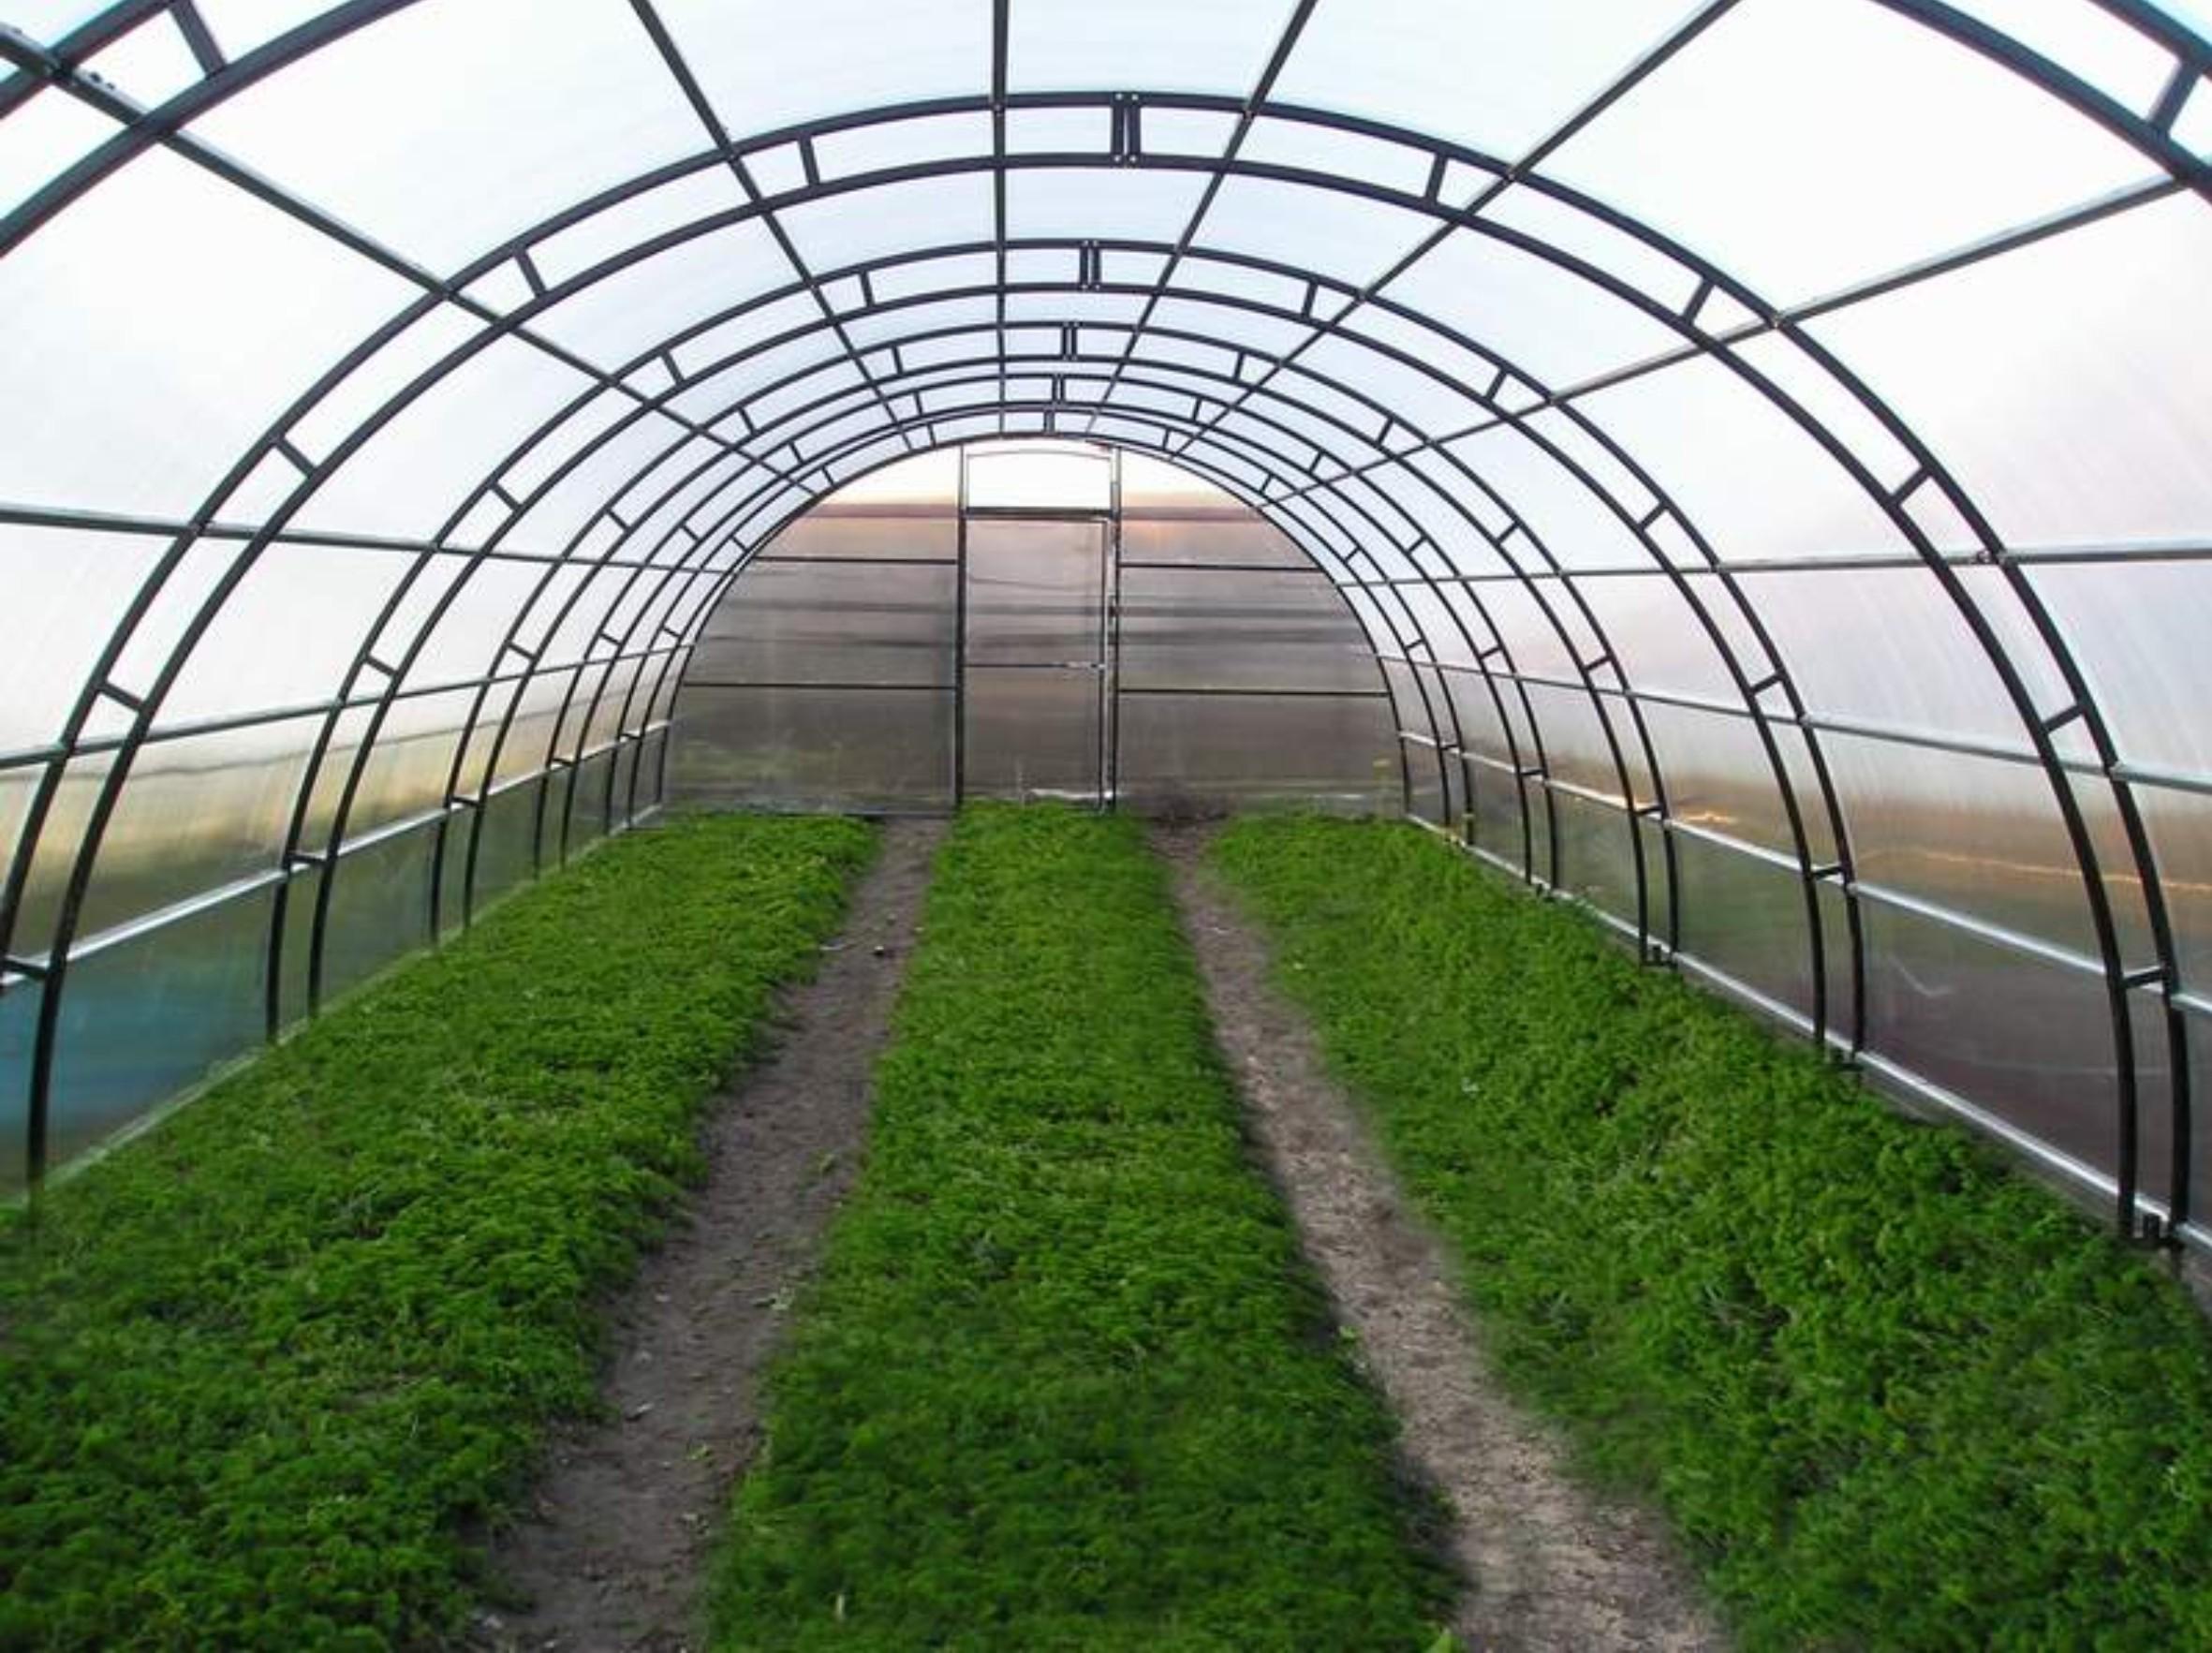 Alimardon Yodgorov built a greenhouse on 1,5 hectares with the assistance of the party in Rishtan district